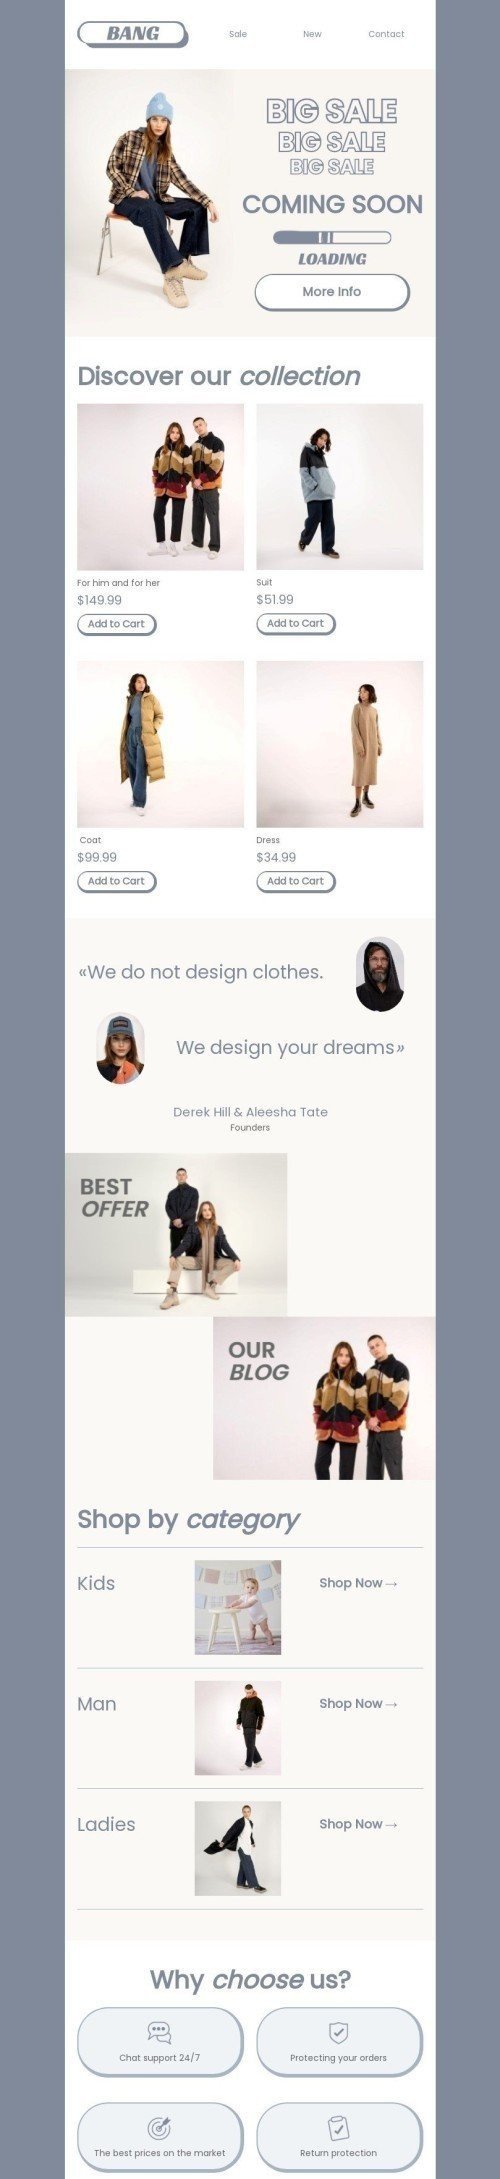 Coming Soon Email Template "We design your dreams" for Fashion industry mobile view